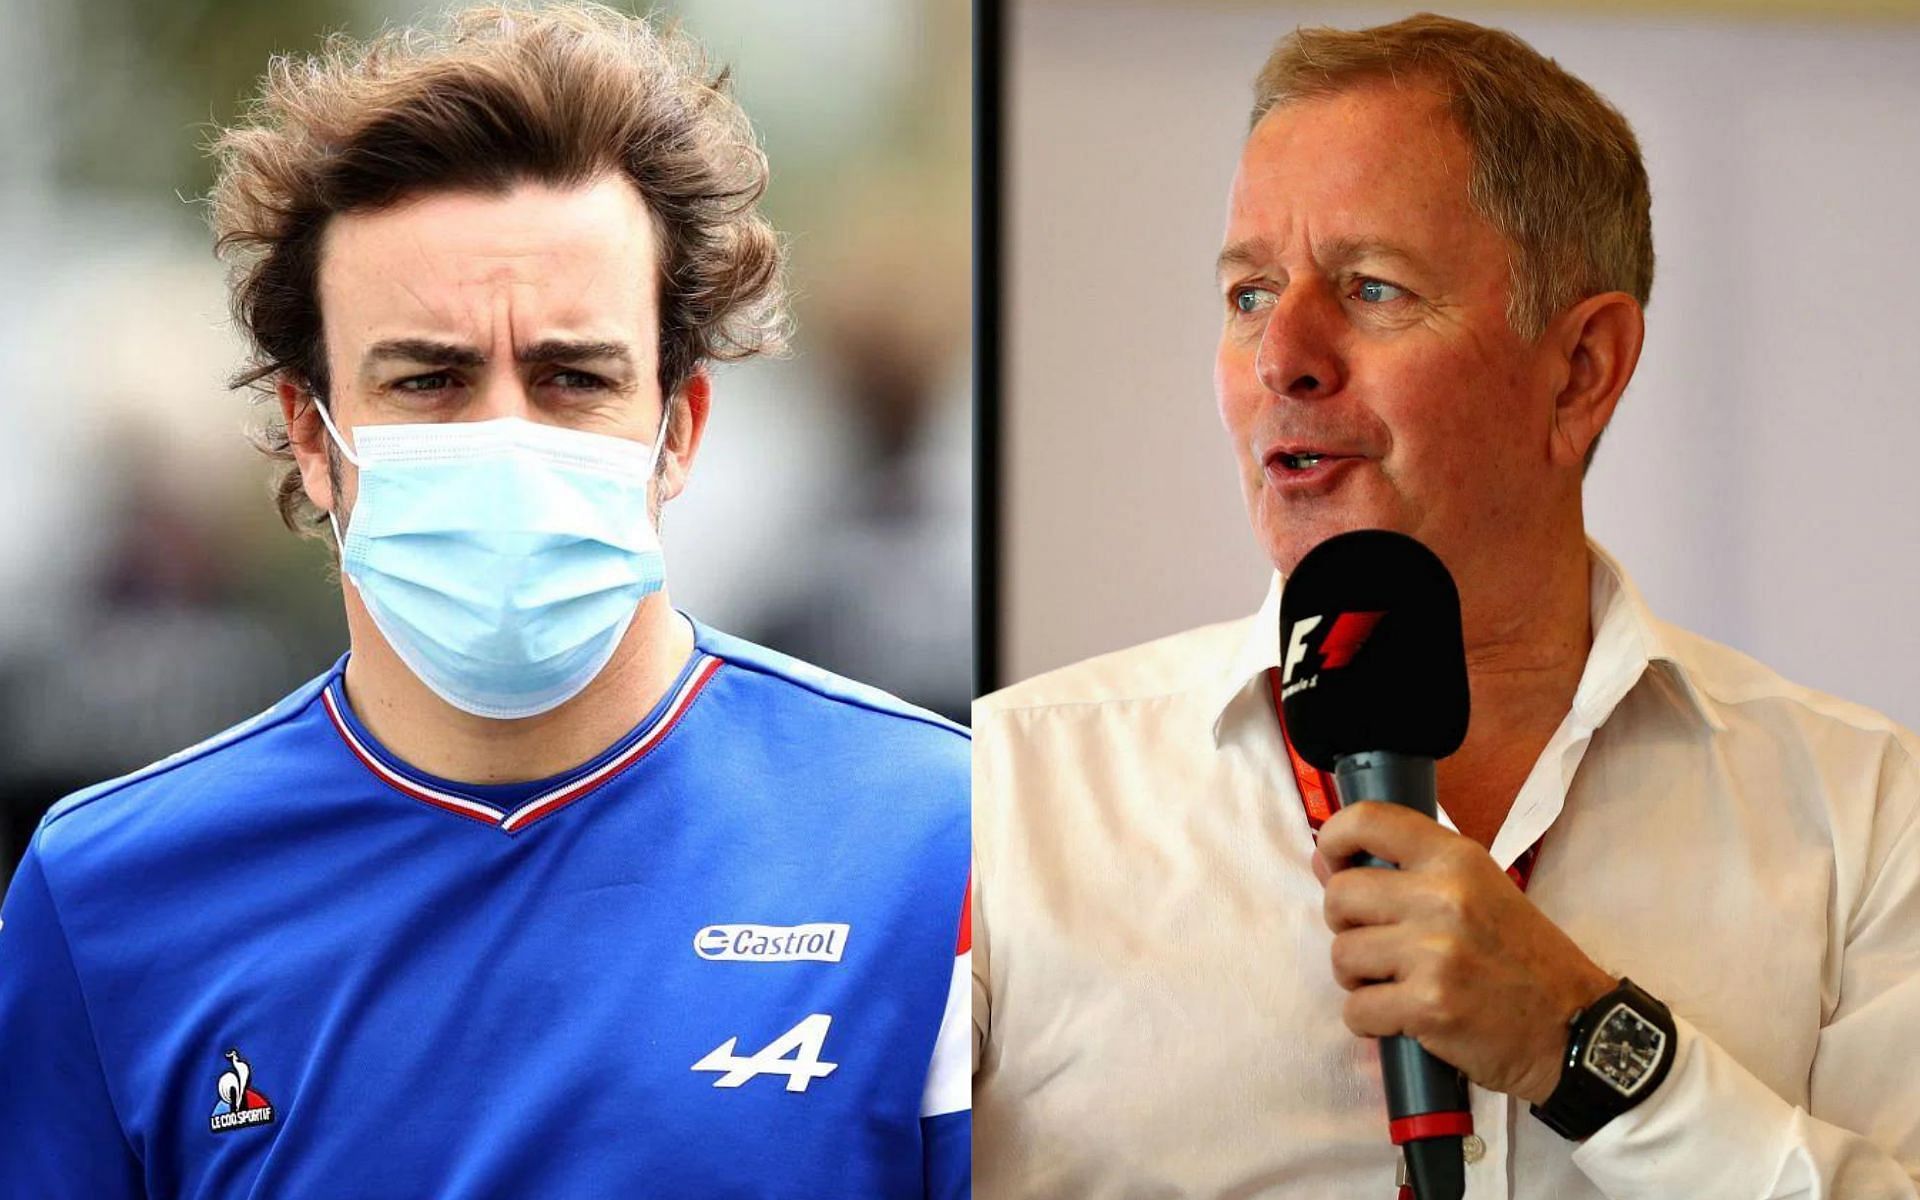 Martin Brundle (right) believes Fernando Alonso (left) has championship potential in 2022